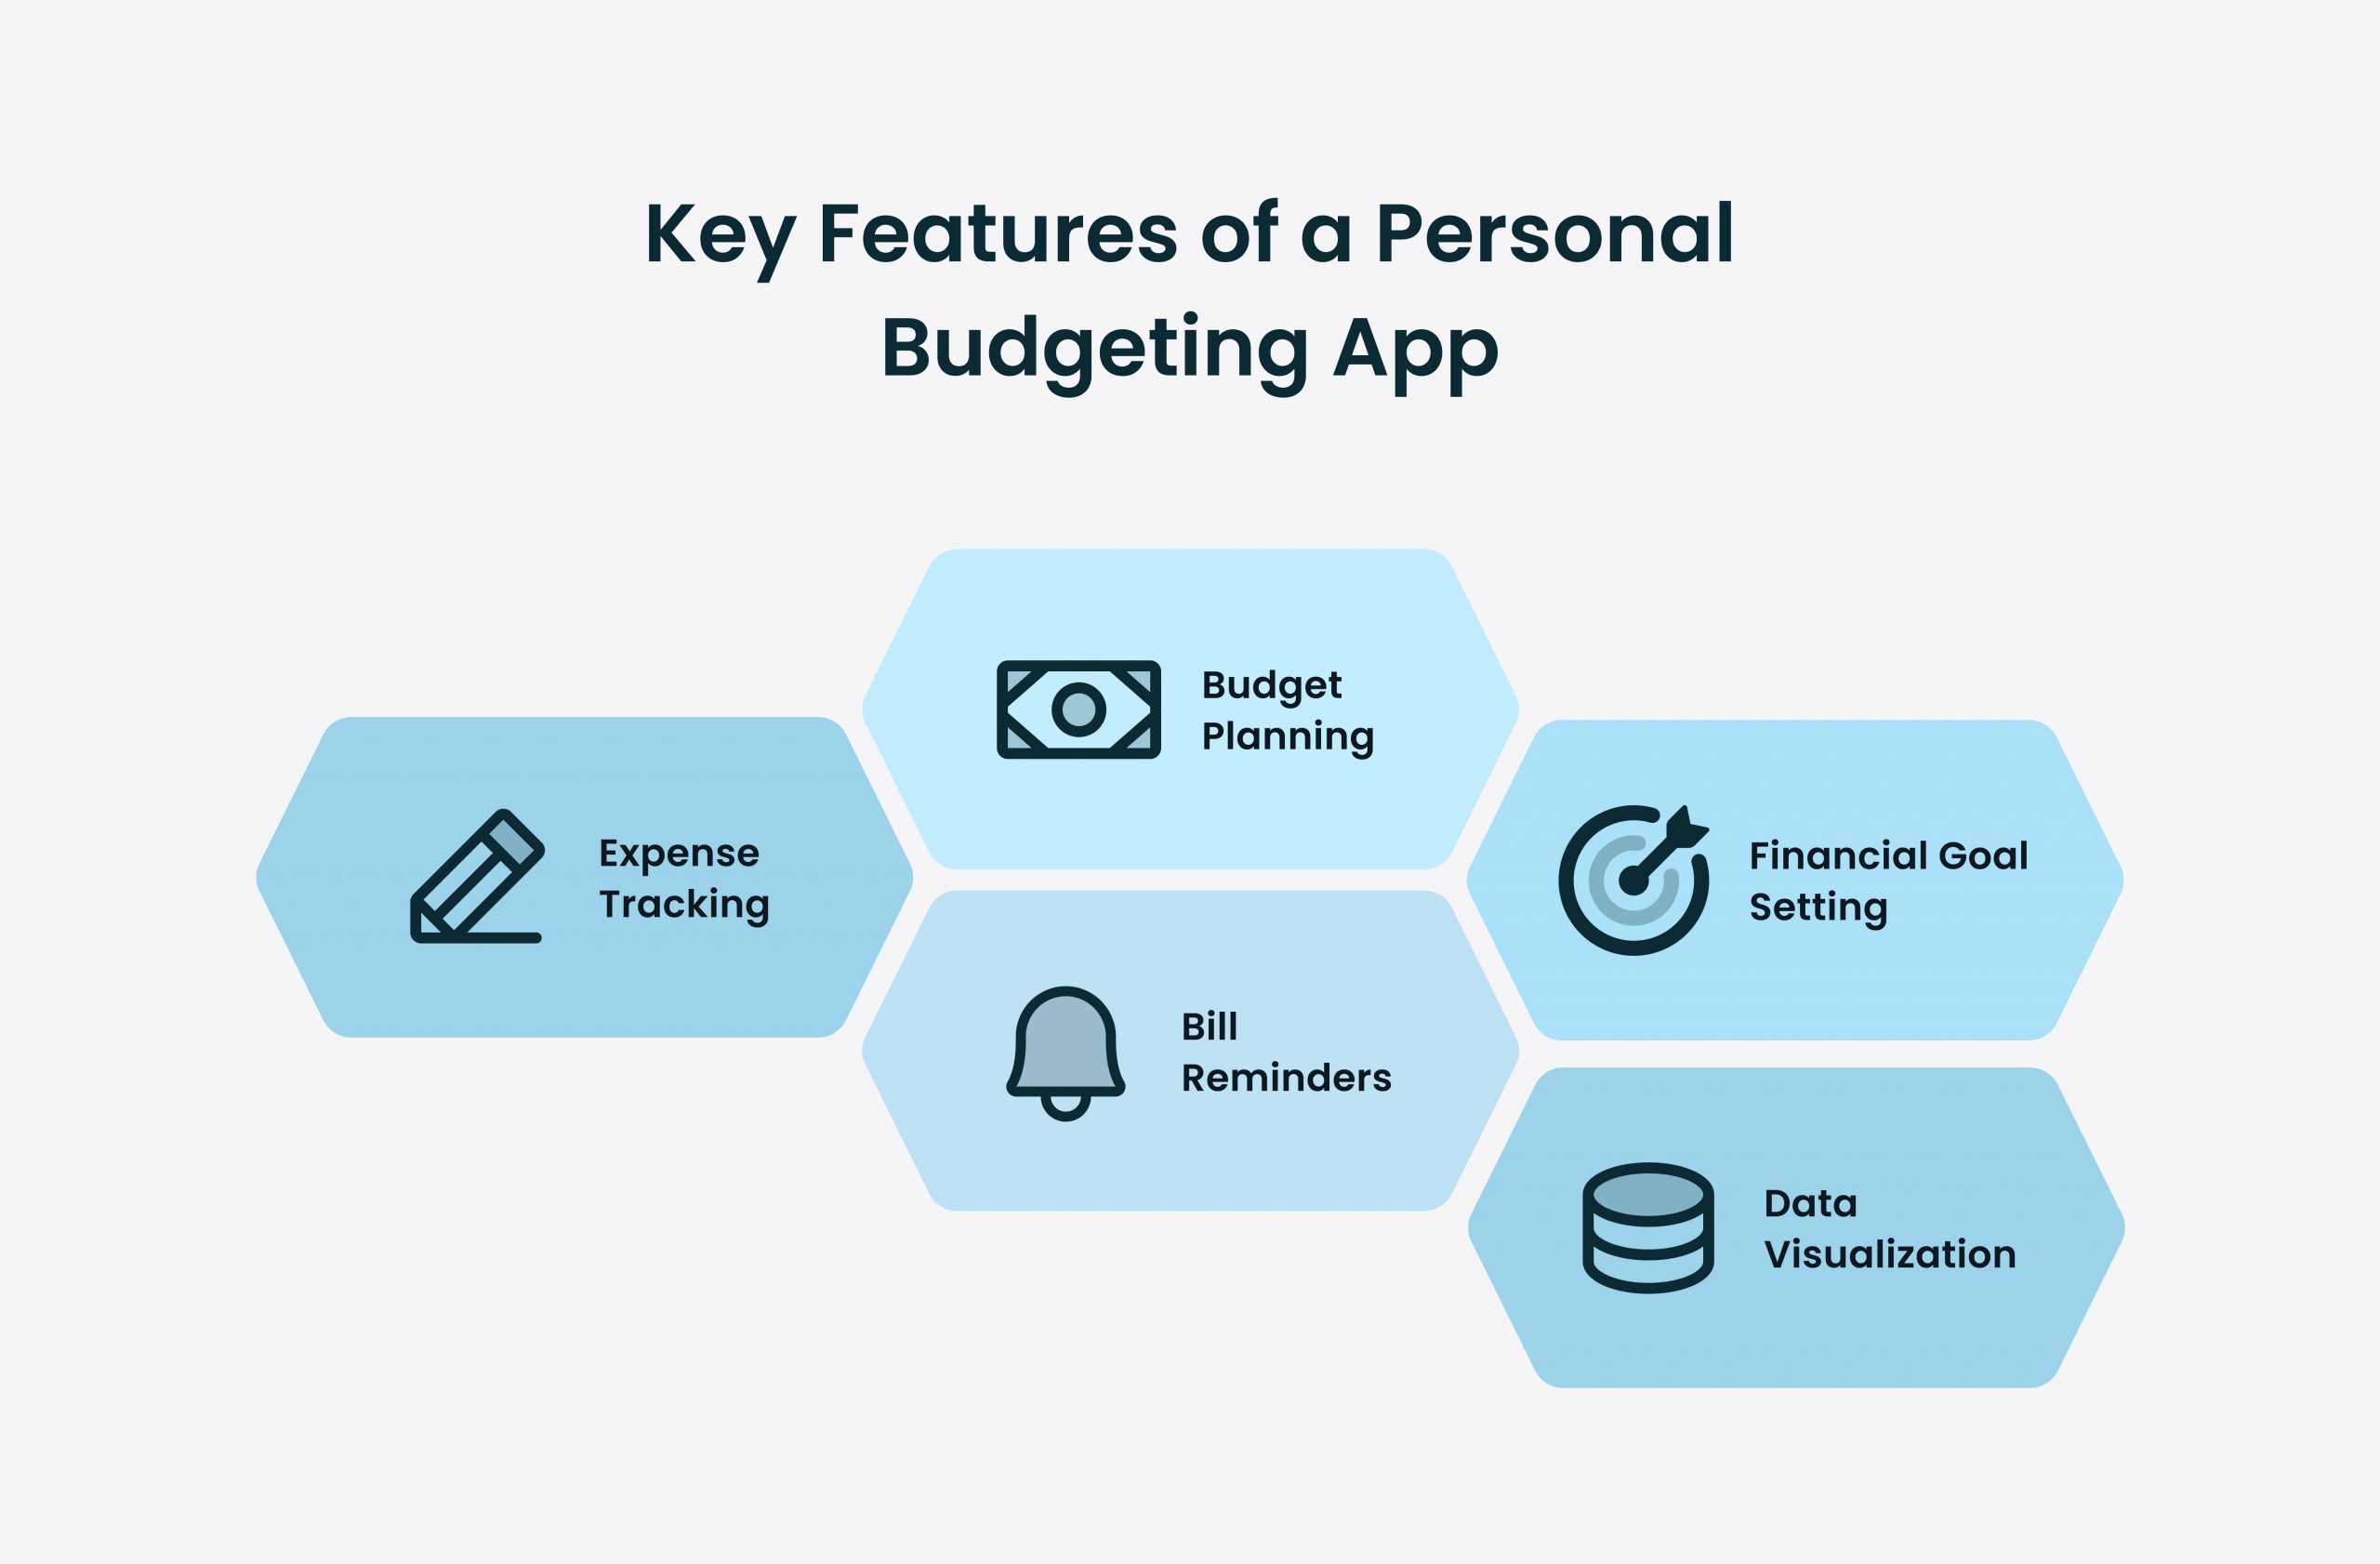 Key Features of a Personal Budgeting App 